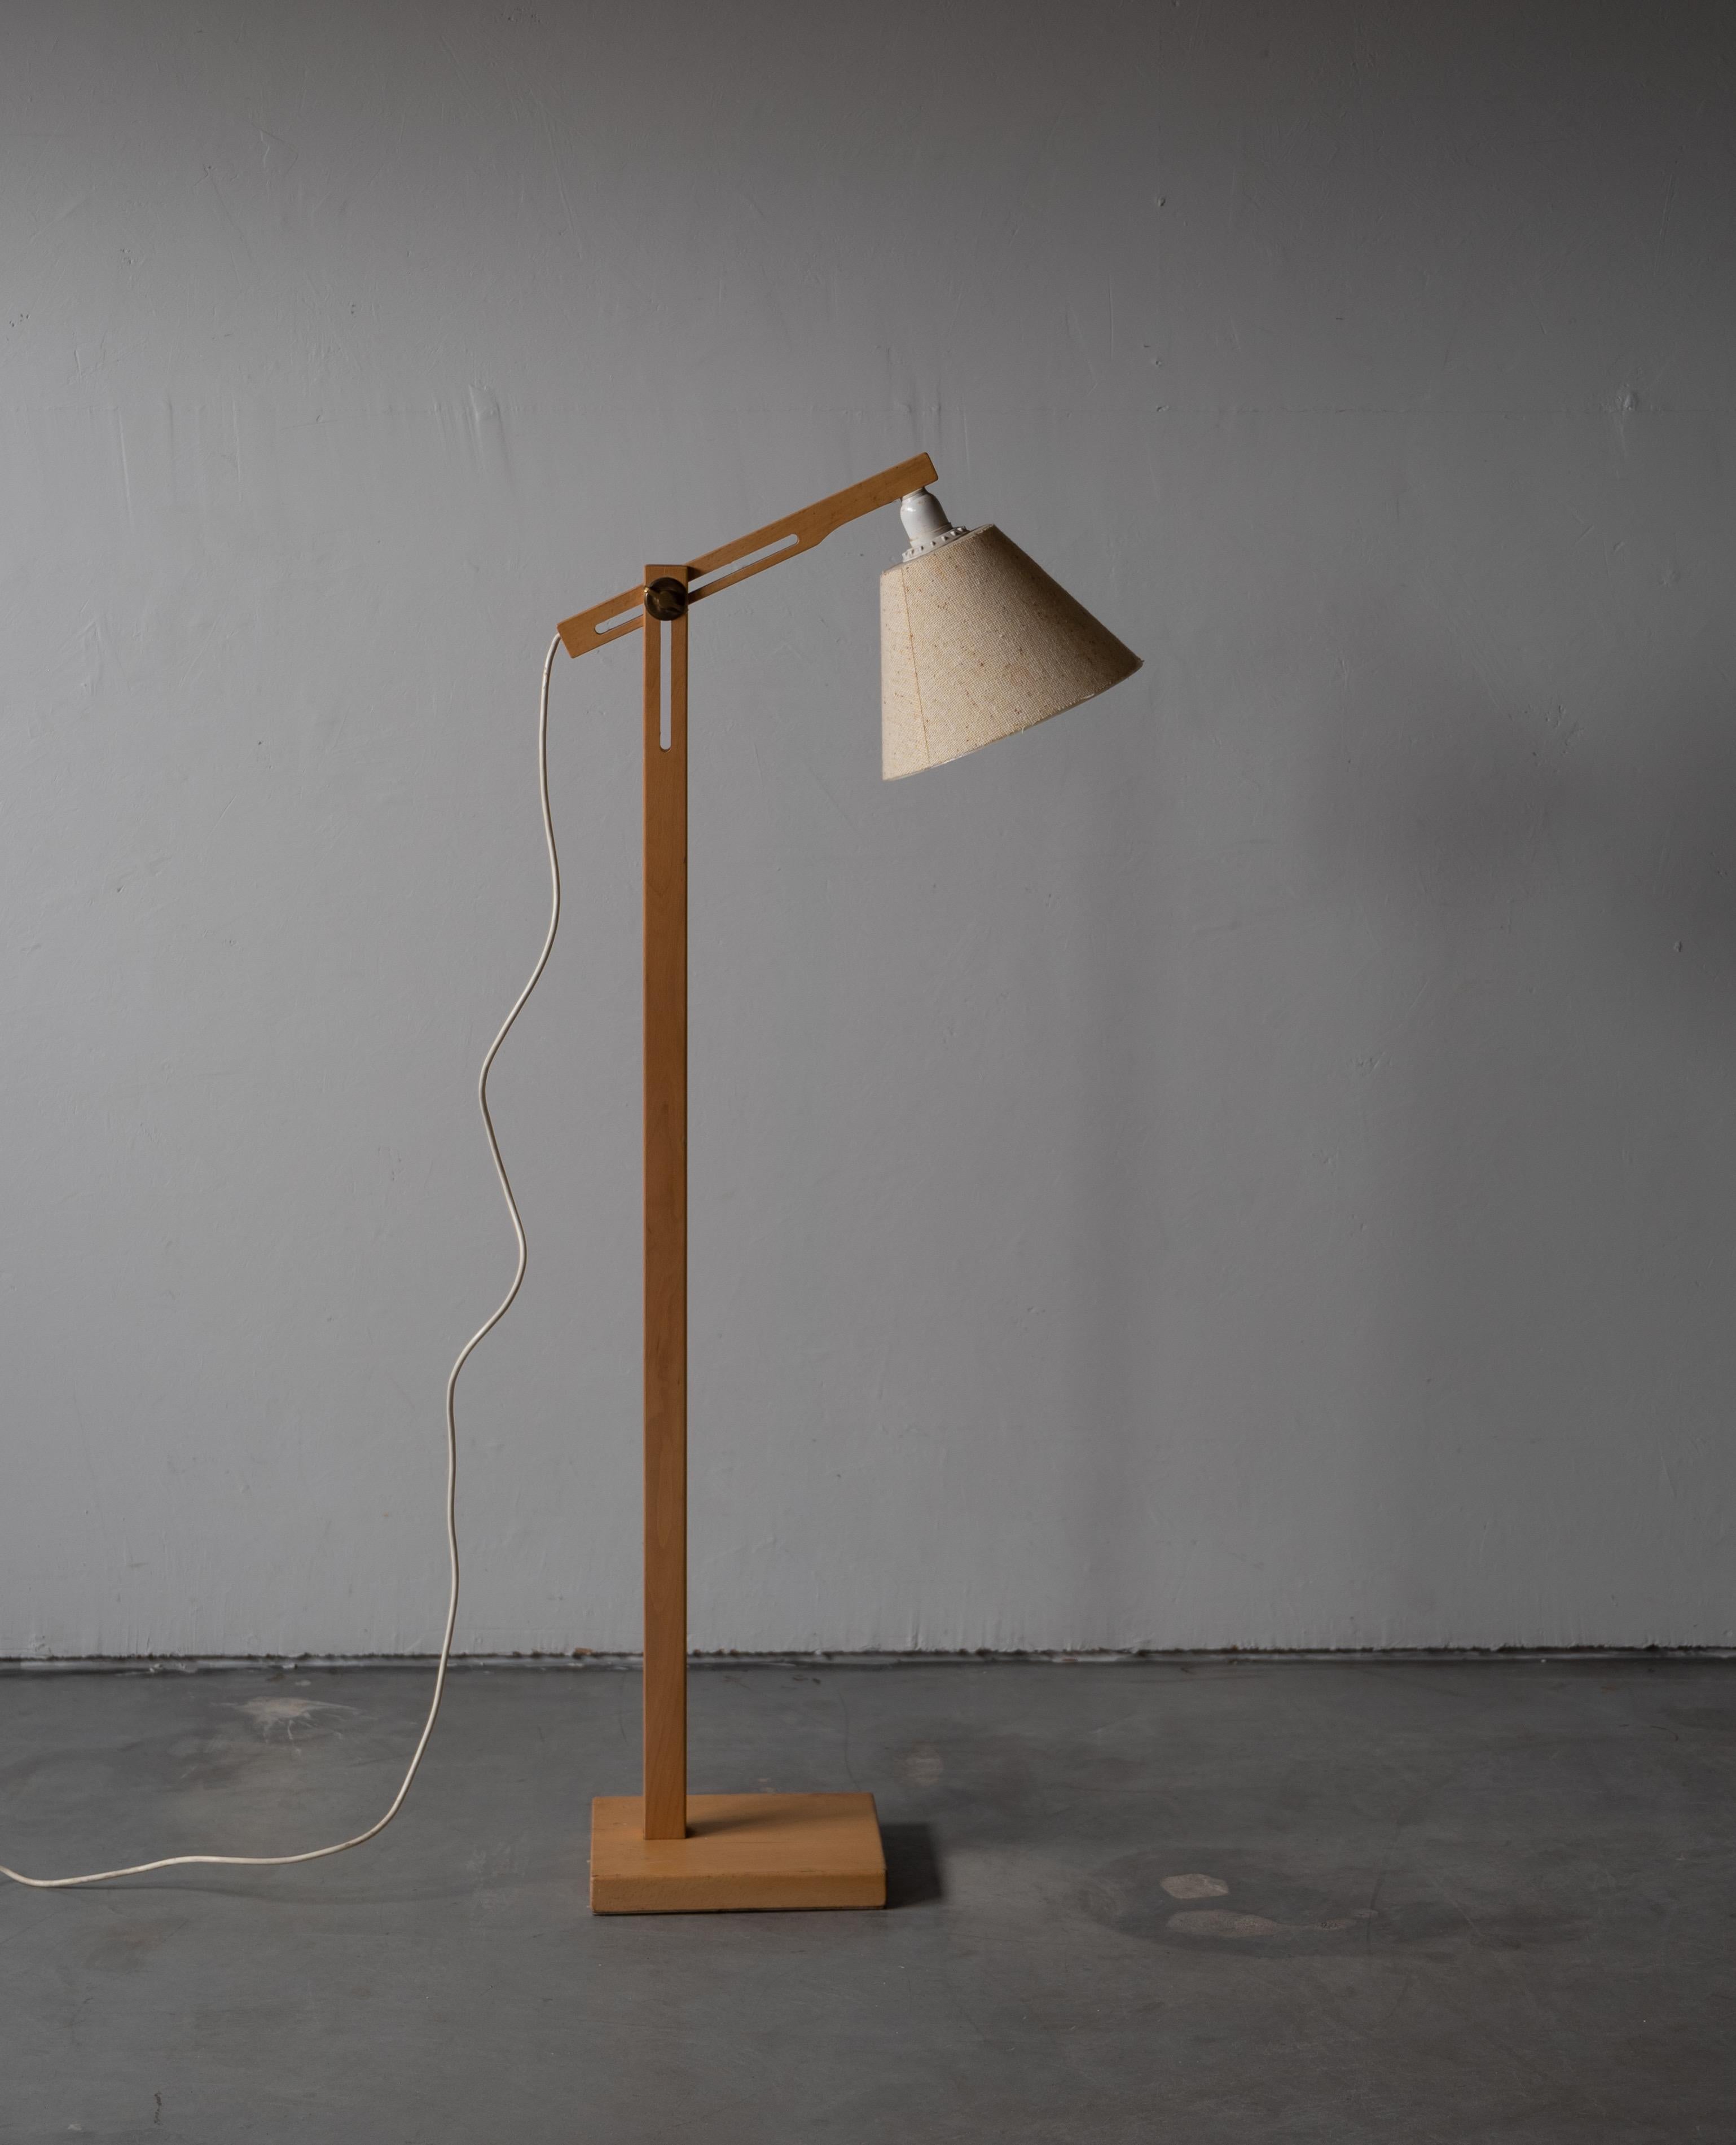 A small adjustable floor lamp, produced by Swedish Ateljé Lyktan. Original lampshade. Circa 1970s. Labeled.

Other Nordic lighting designers include Paavo Tynell, Hans-Agne Jacobson, Carl-Axel Acking, and Alvar Aalto.